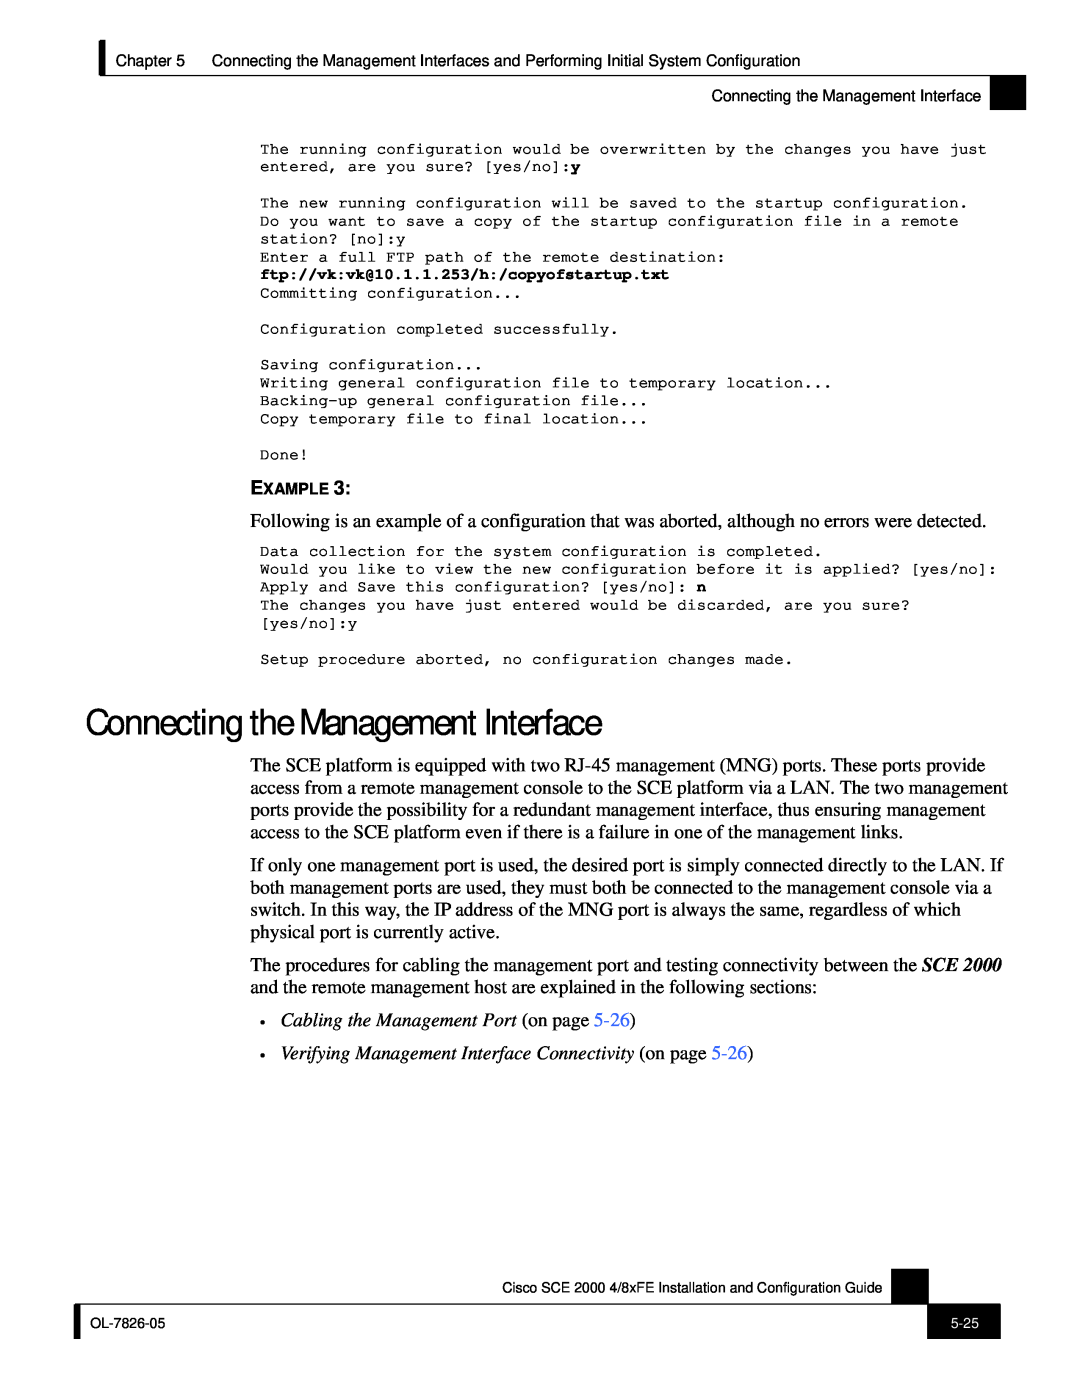 Cisco Systems SCE 2000 4/8xFE manual Connecting the Management Interface, Cabling the Management Port on page 